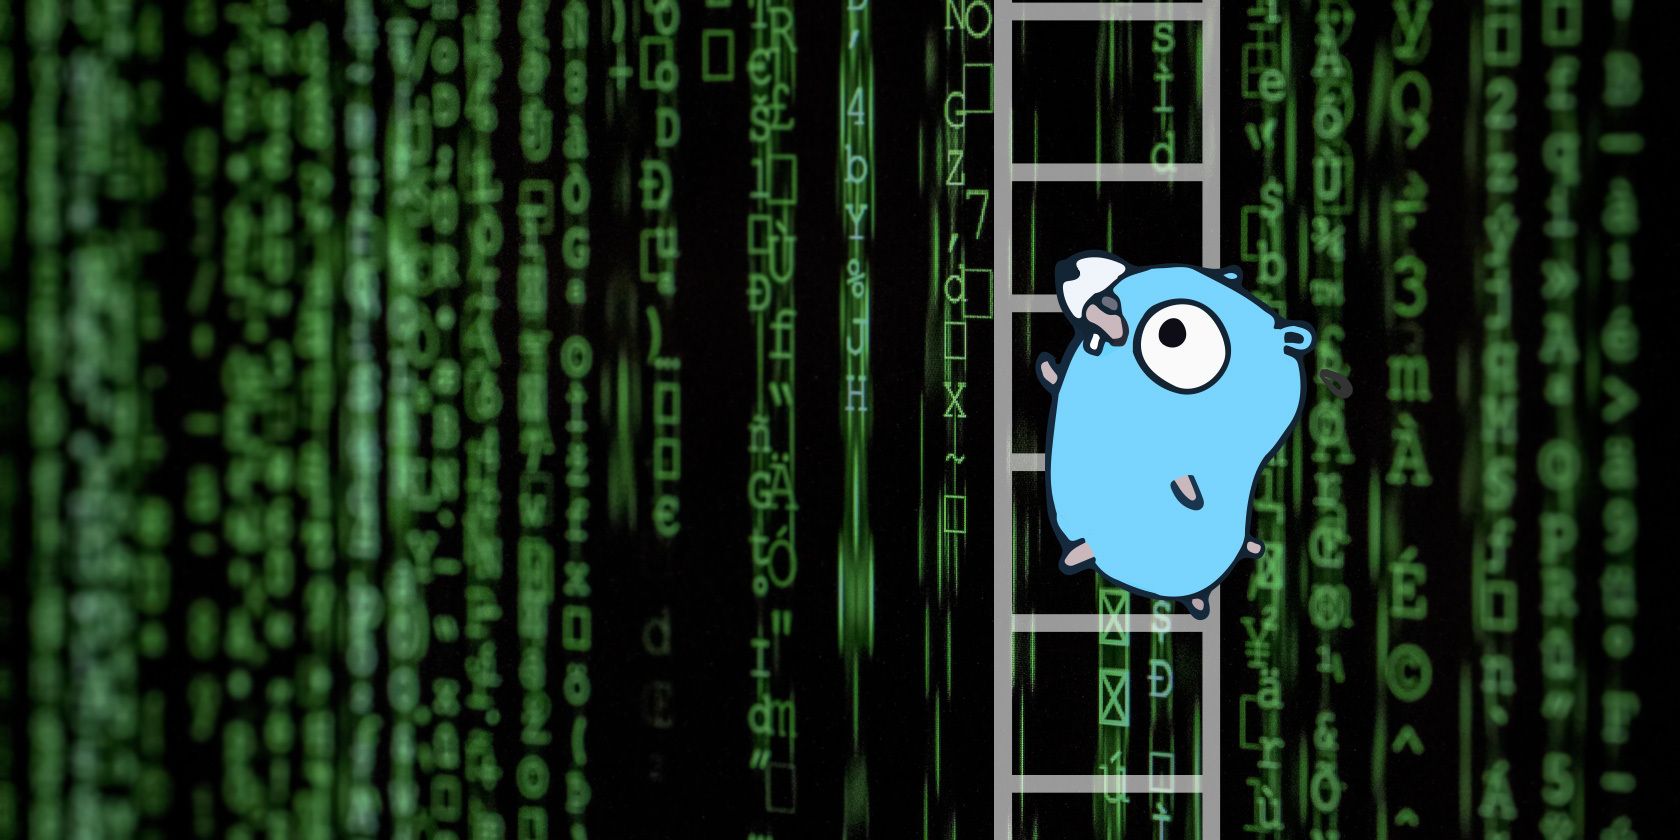 The golang mascot, a blue gopher with large eyes, in front of columns of random green symbols.